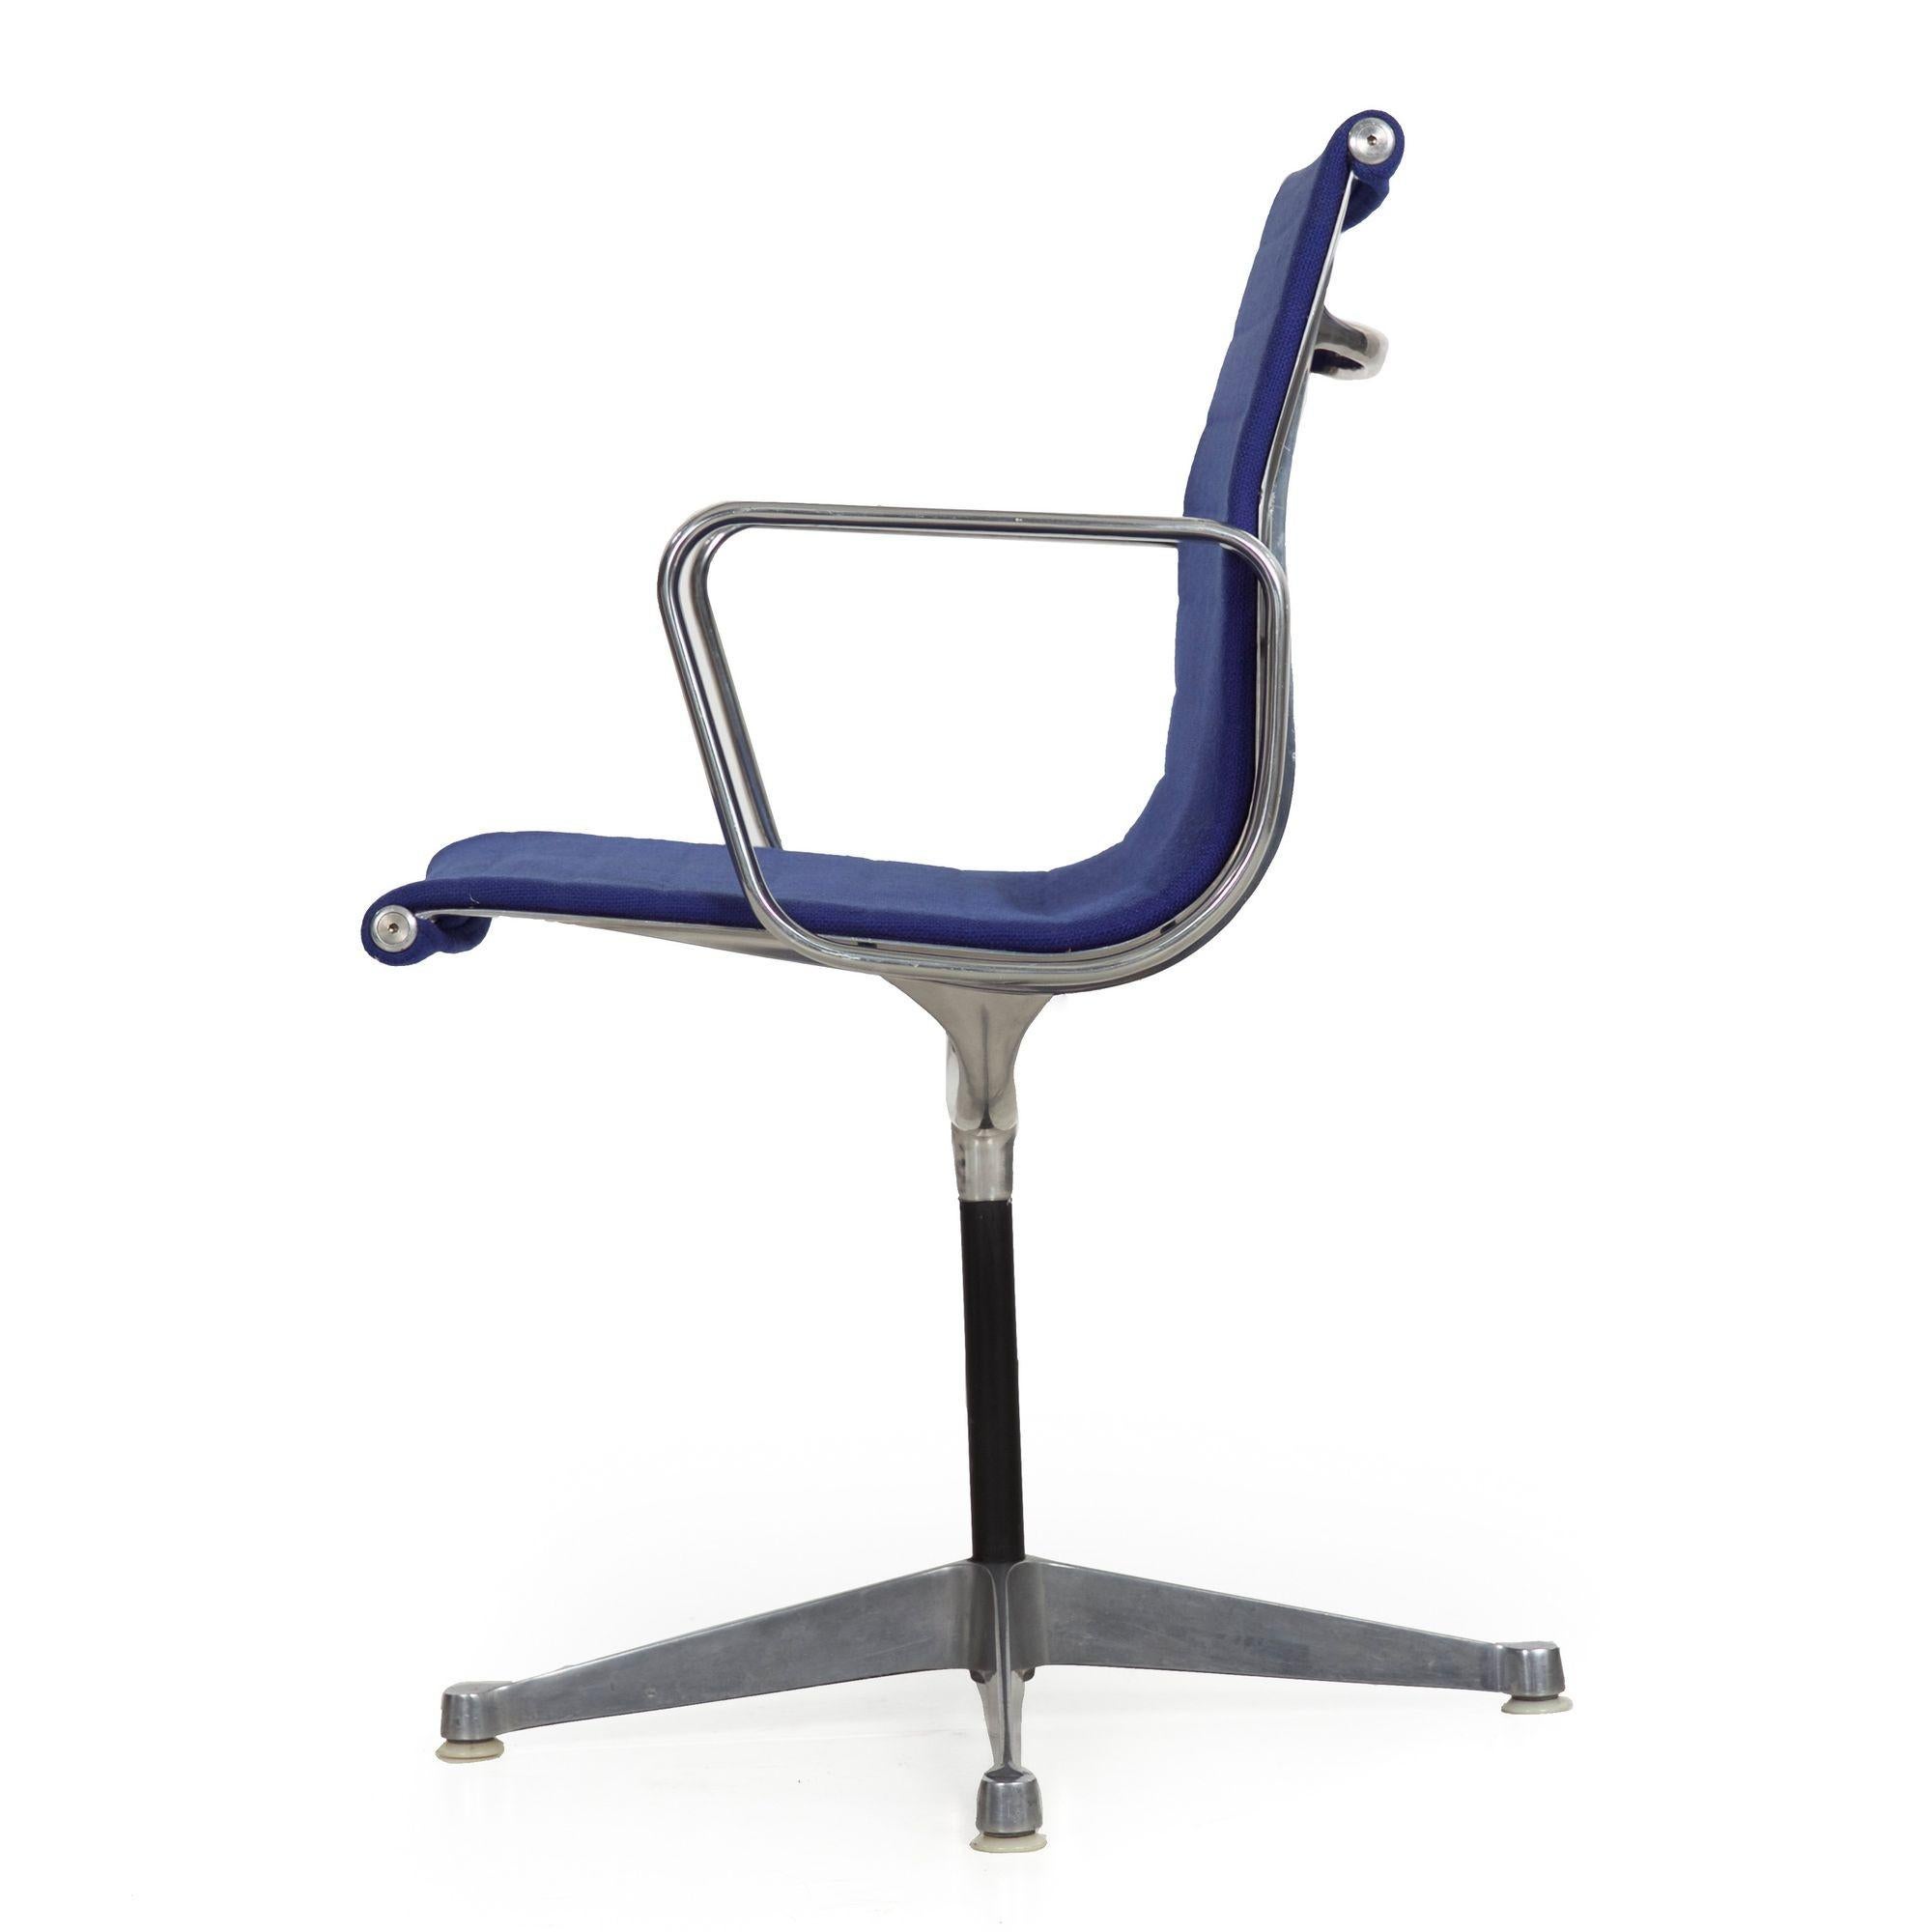 Mid-Century Modern Vintage Blue Swivel Desk Chair by Charles & Ray Eames for Herman Miller For Sale